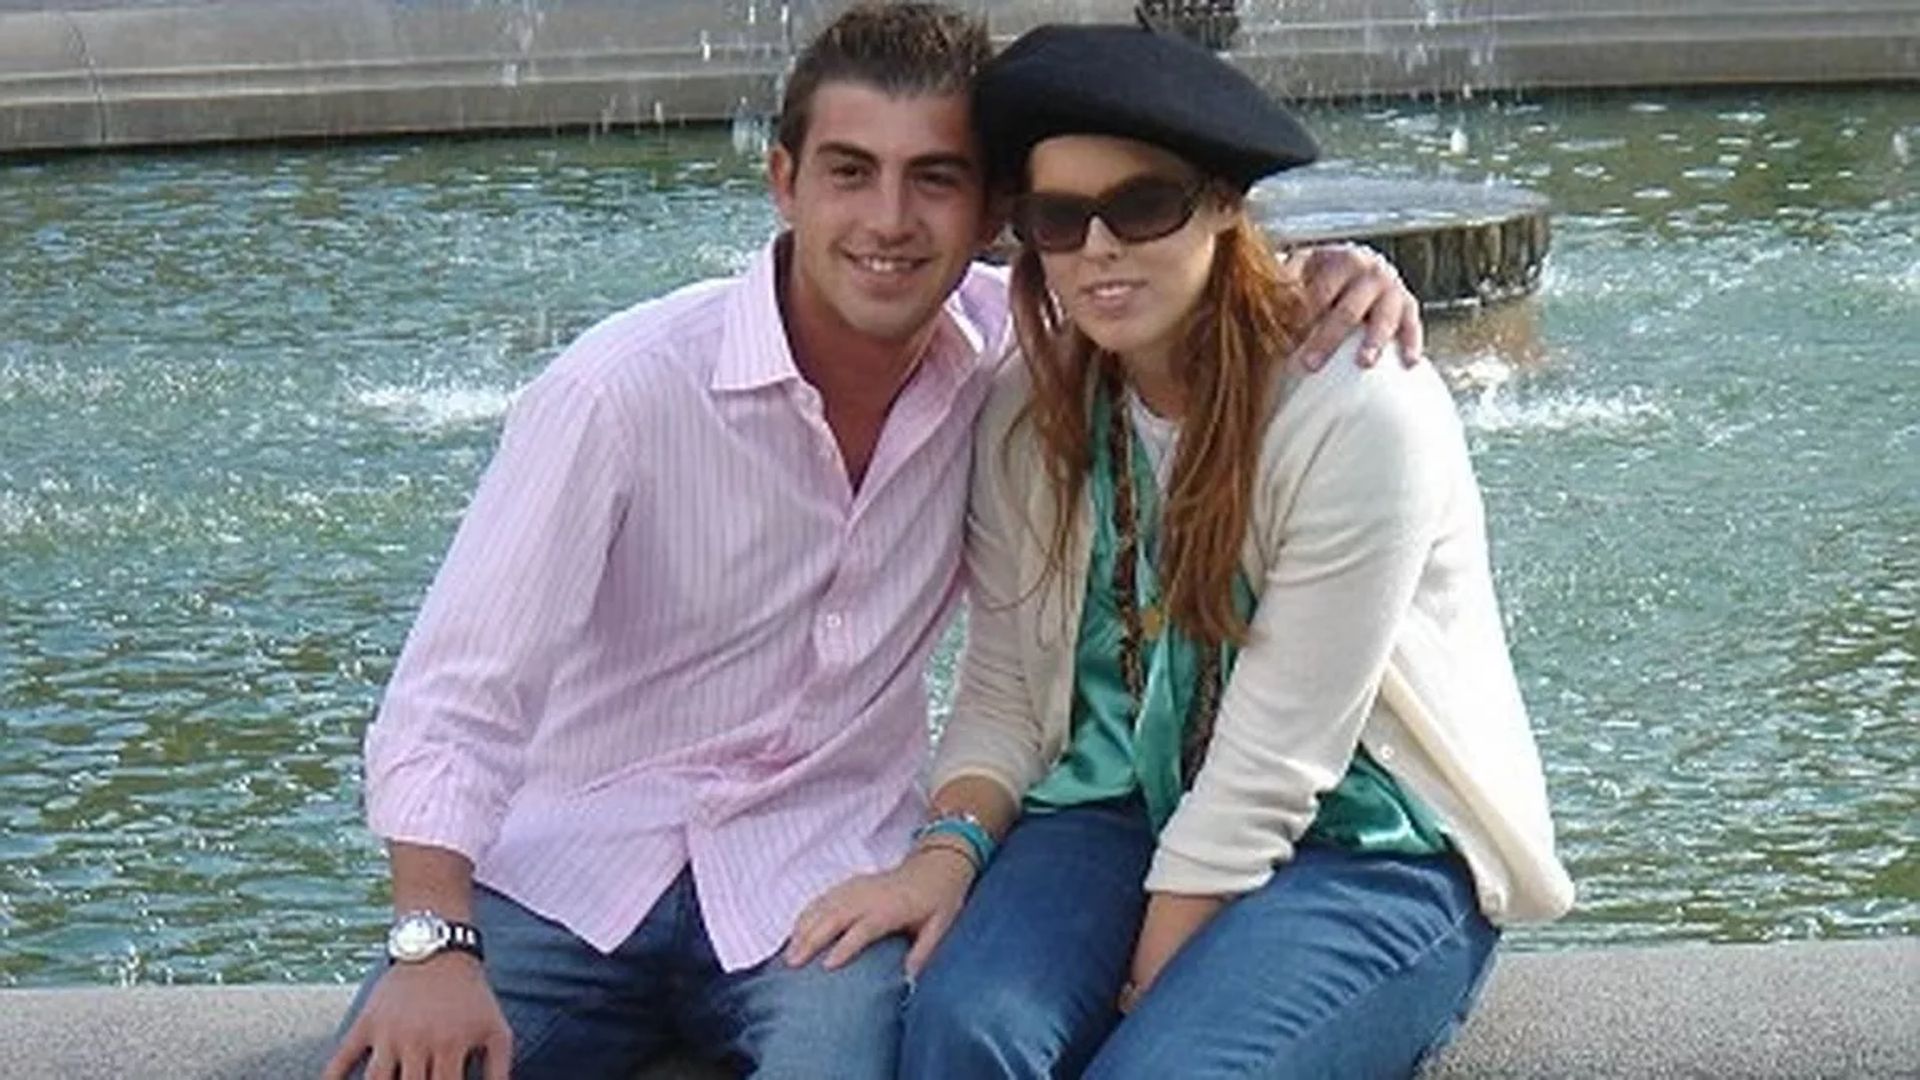 Princess Beatrice's former boyfriend Paolo Liuzzo is found dead after suspected overdose